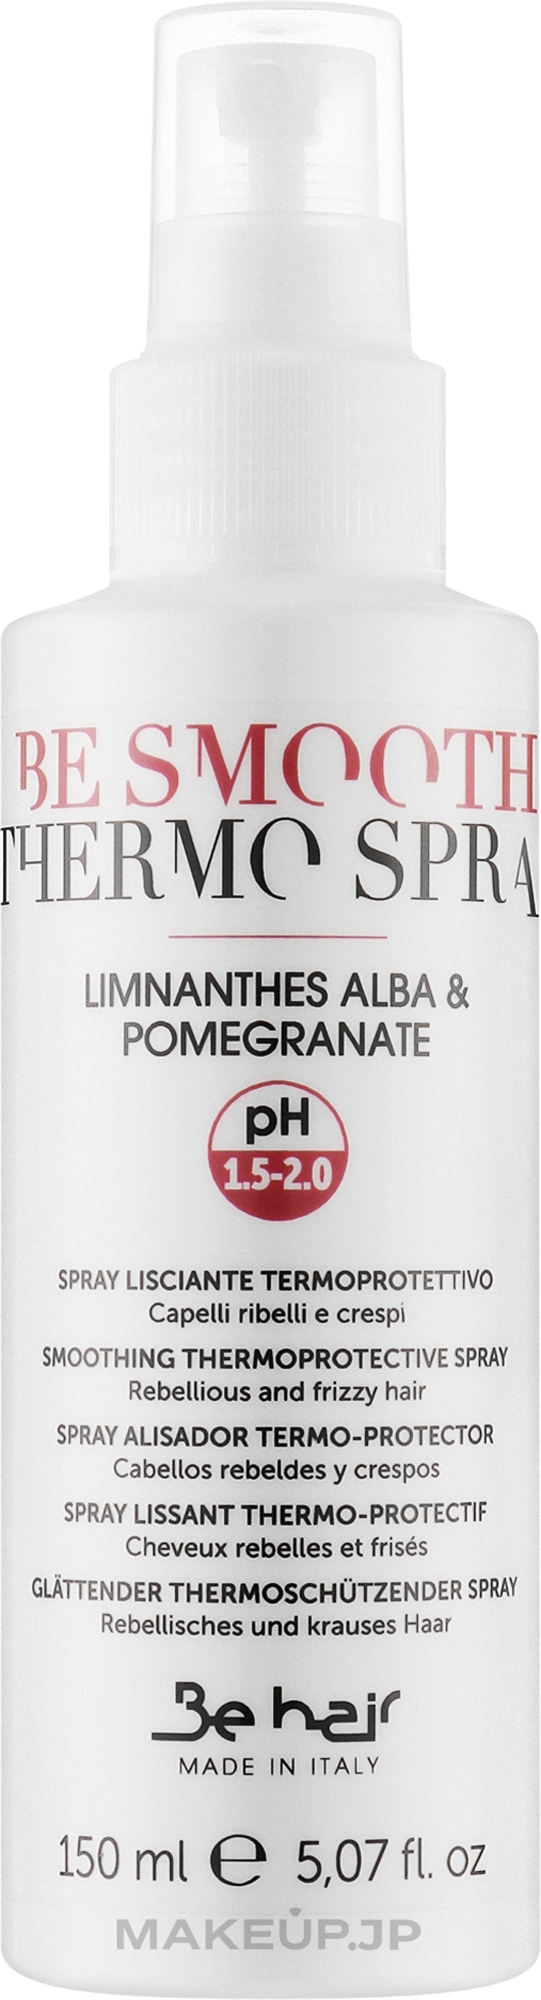 Smoothing Thermal Protective Spray - Be Hair Be Smooth Thermo Spray — photo 150 ml